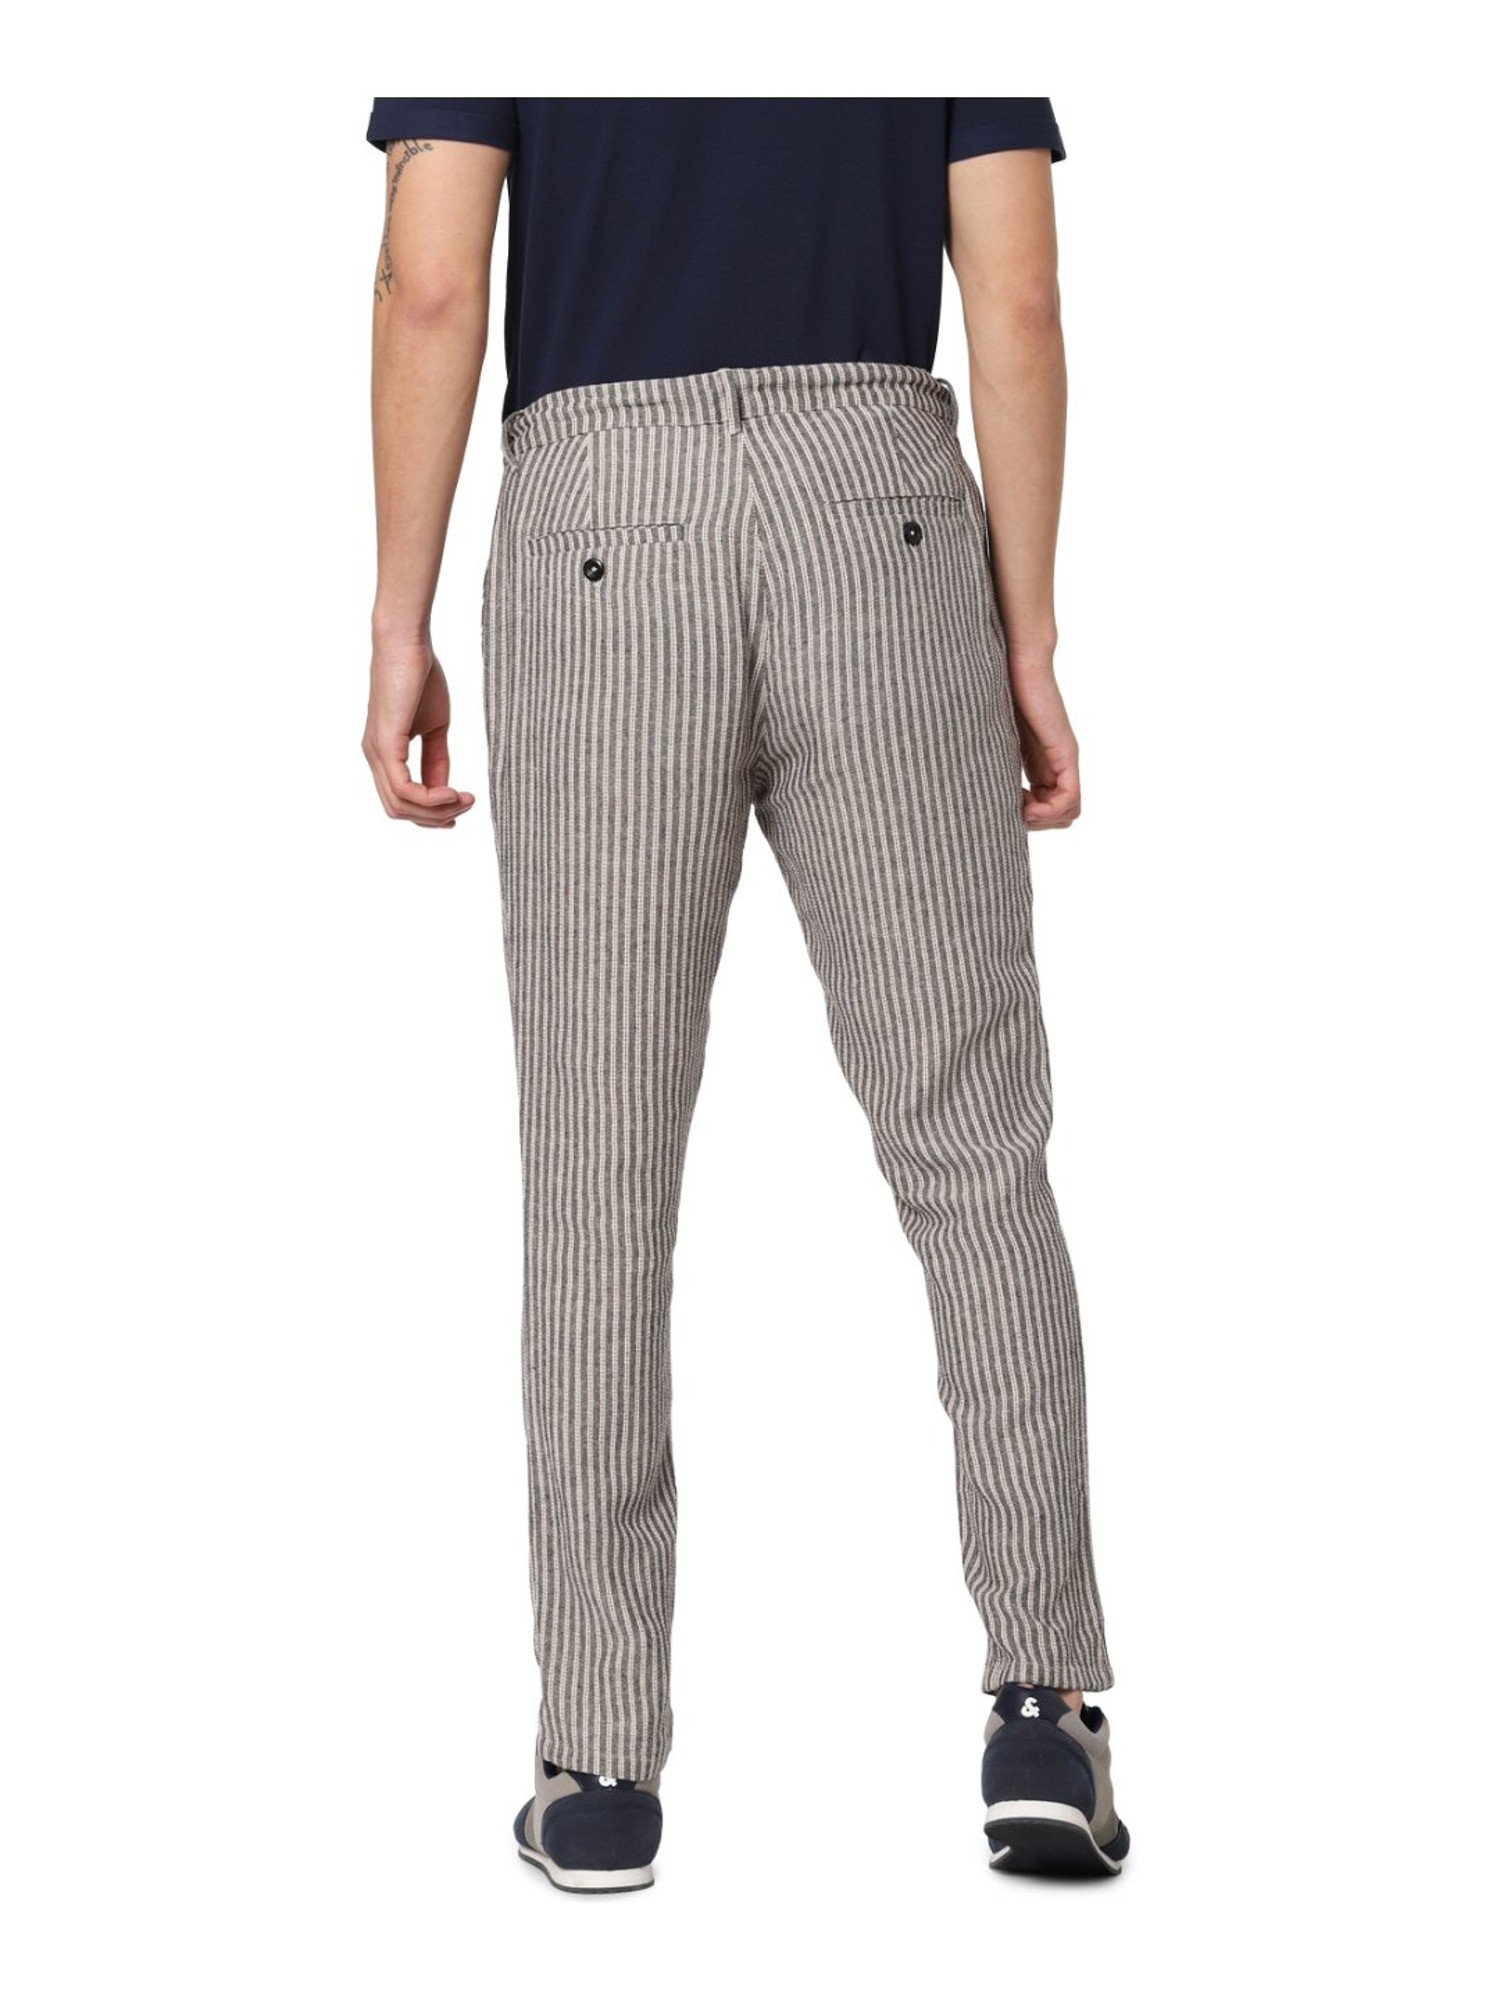 Jack And Jones Olive Trousers  Buy Jack And Jones Olive Trousers online in  India